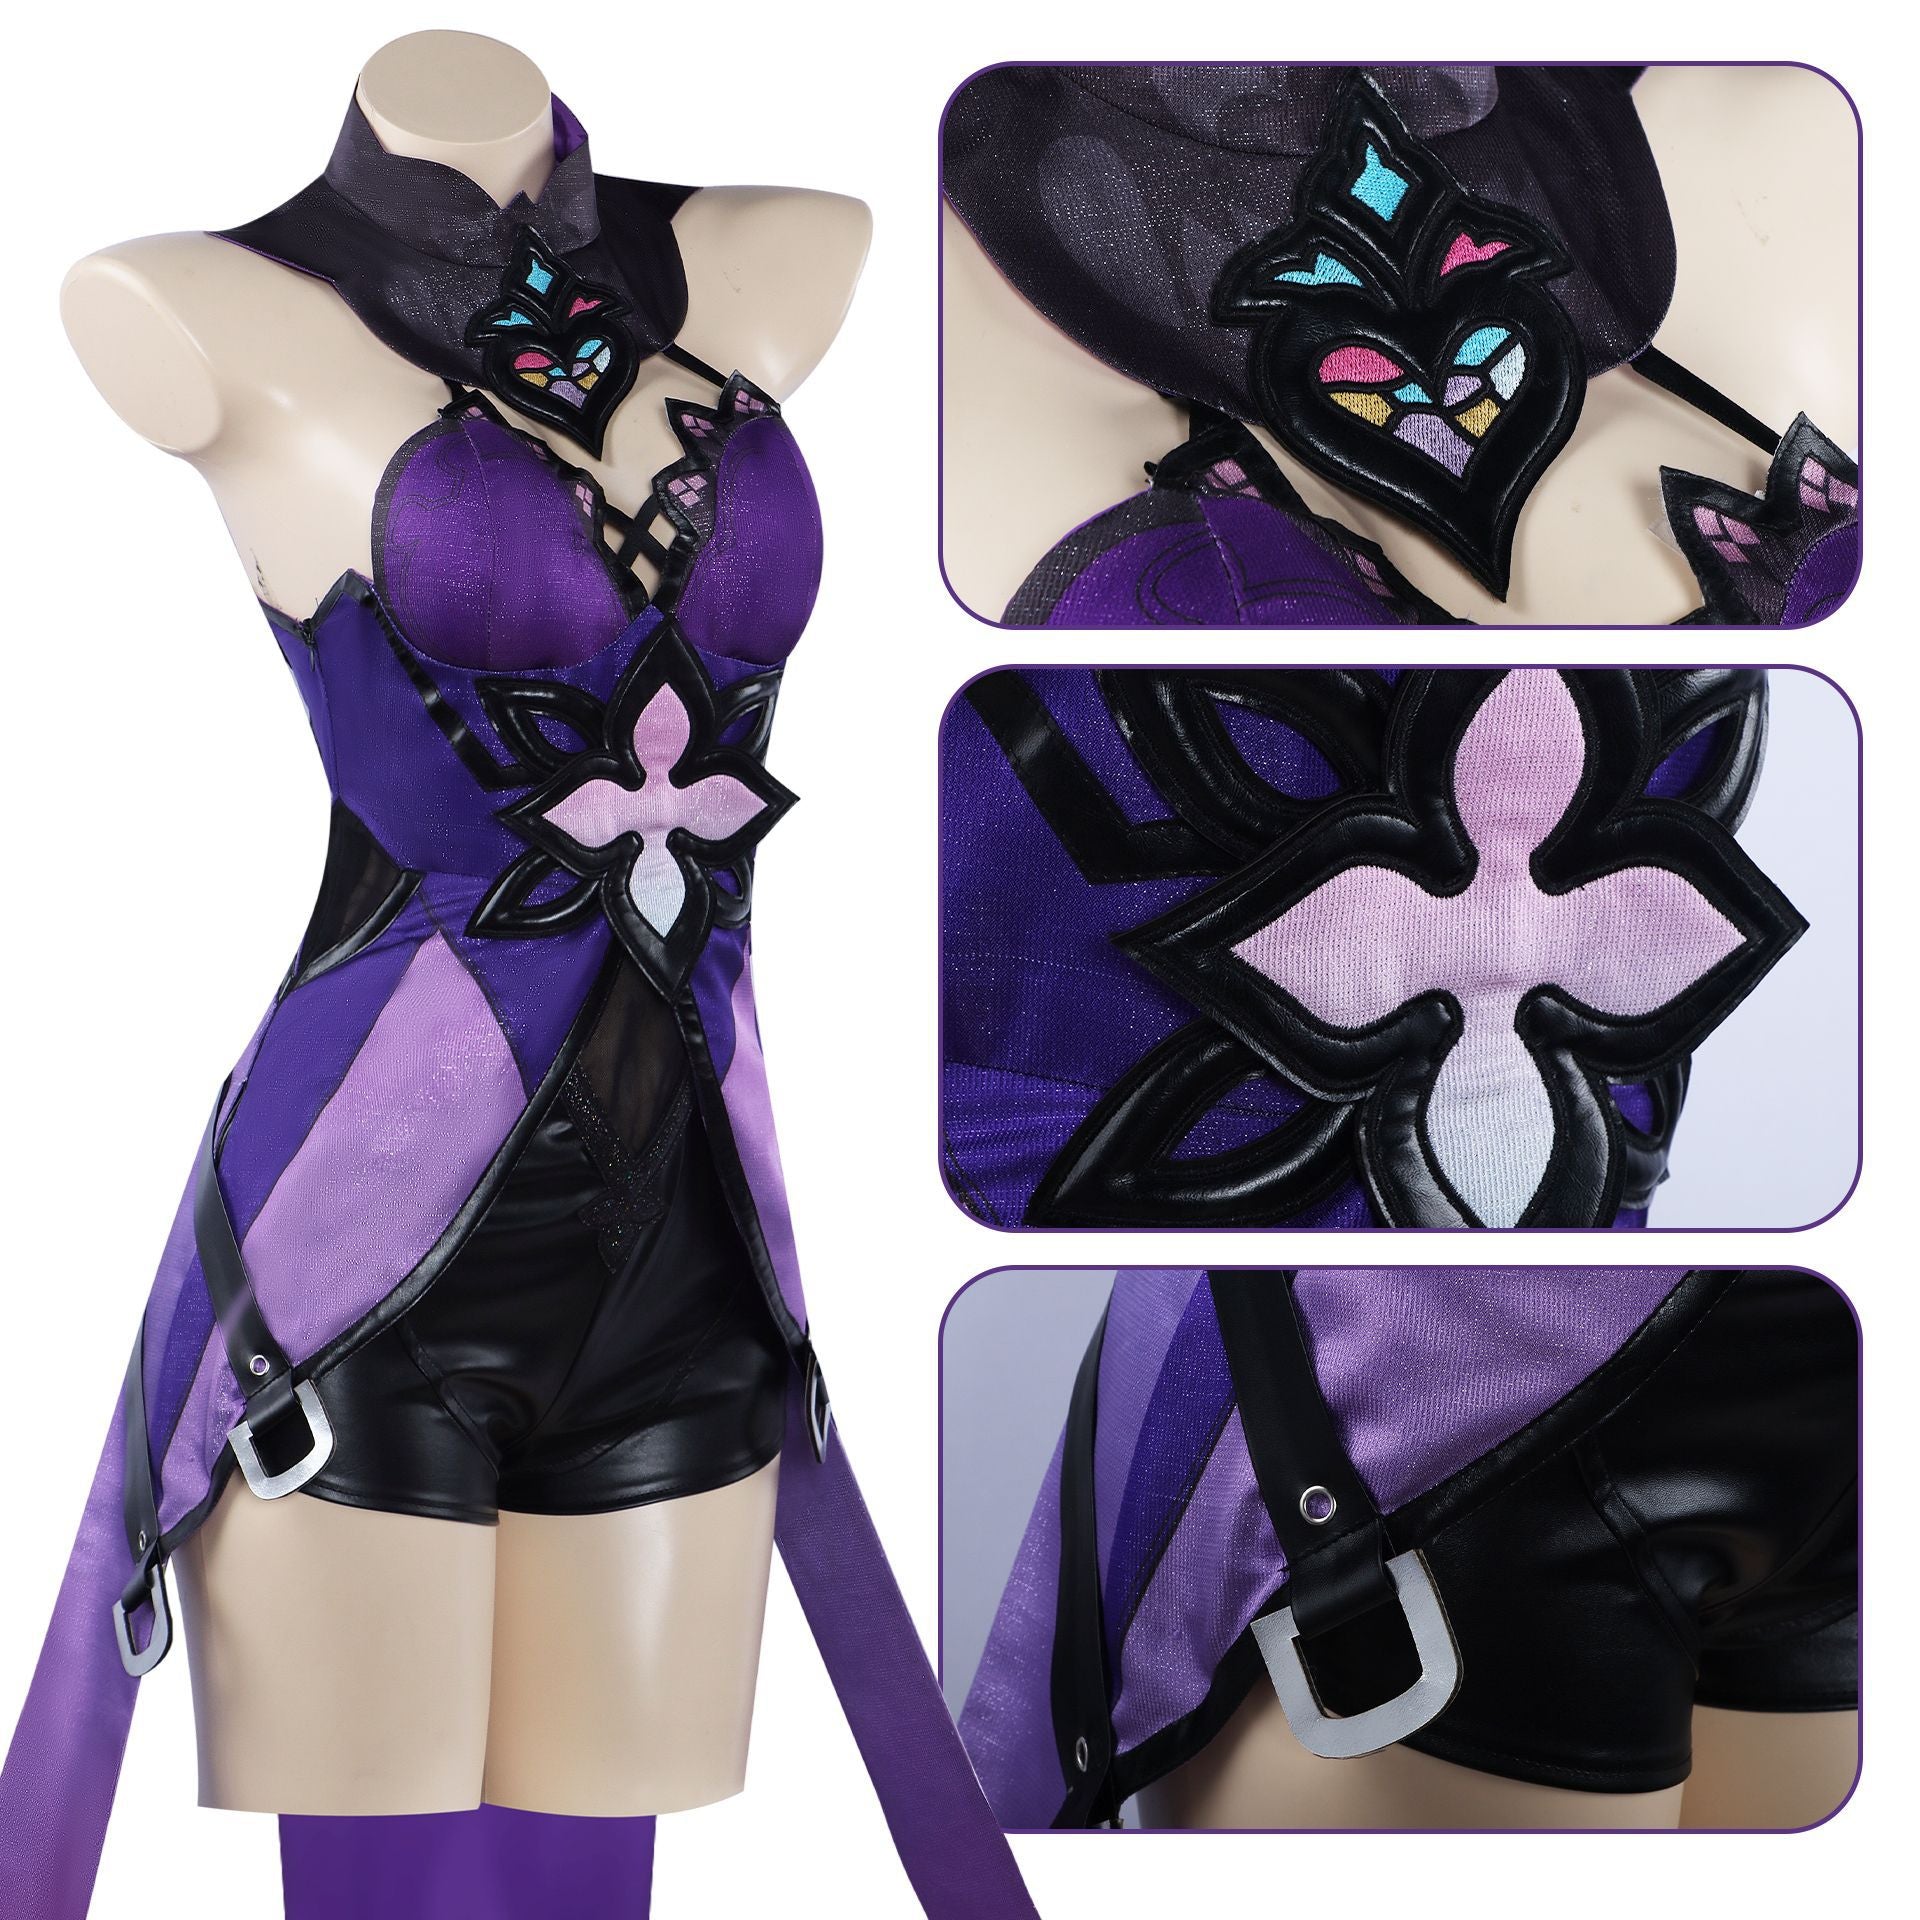 Rulercosplay Honkai Star Rail Black Swan Uniform Suit Cosplay Costume With Accessories For Halloween Party